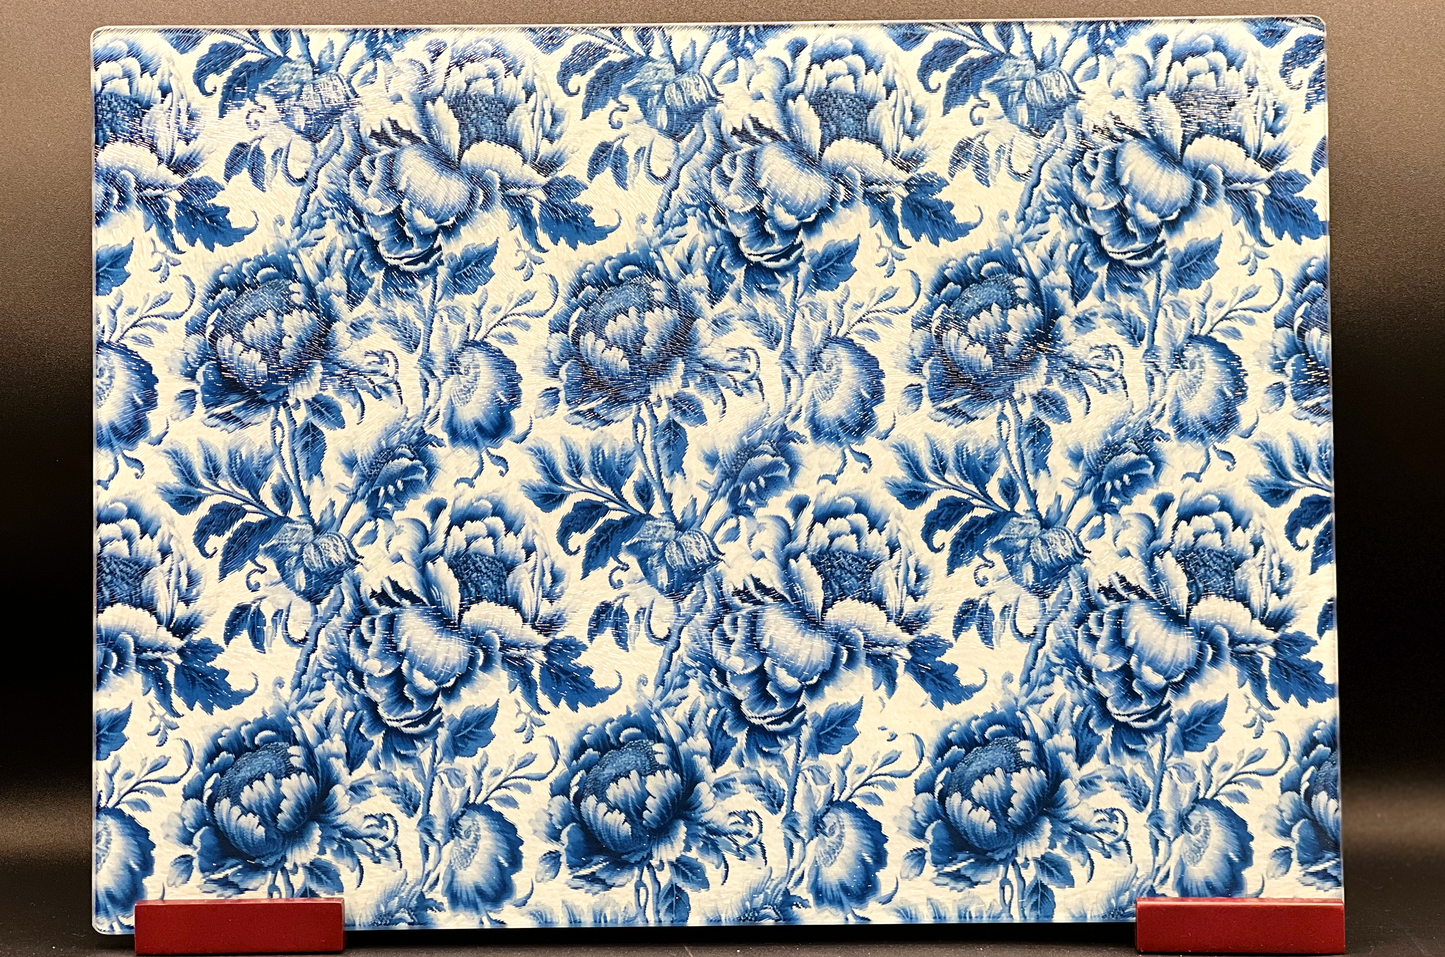 Large Cutting Board - Blue and White Floral